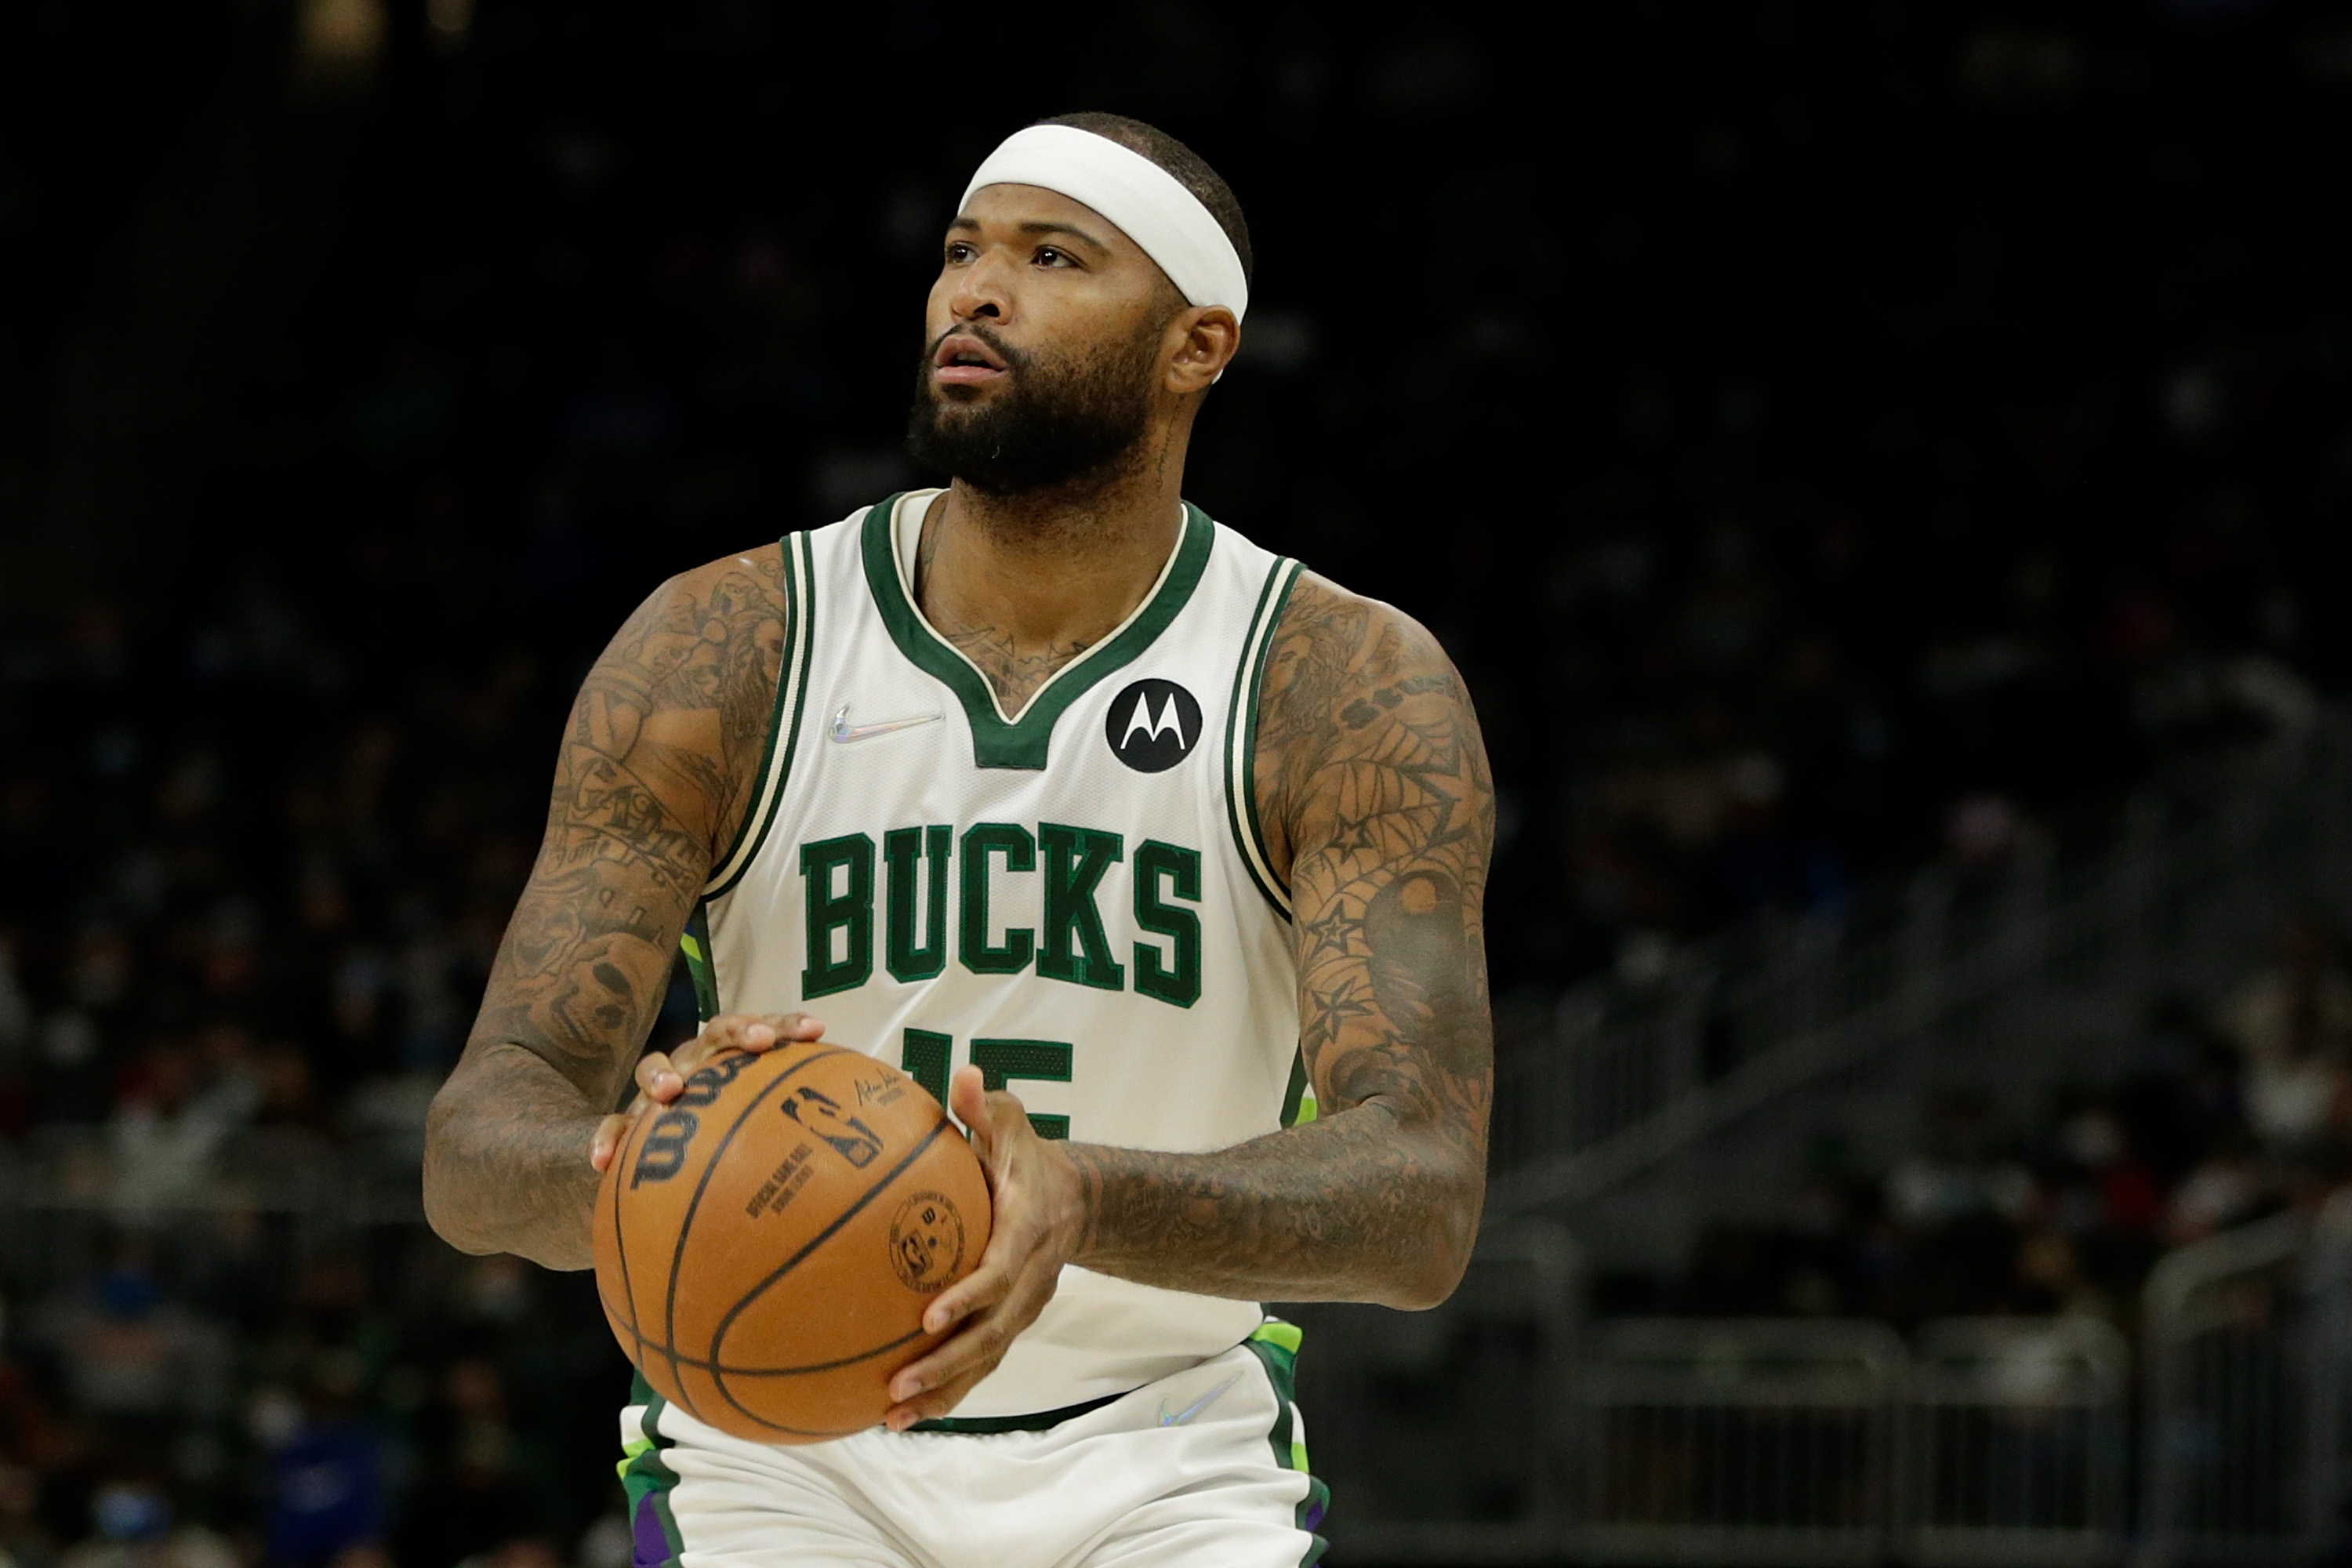 DeMarcus Cousins Reportedly Agrees to 10-Day Contract with Nuggets After Bucks Stint